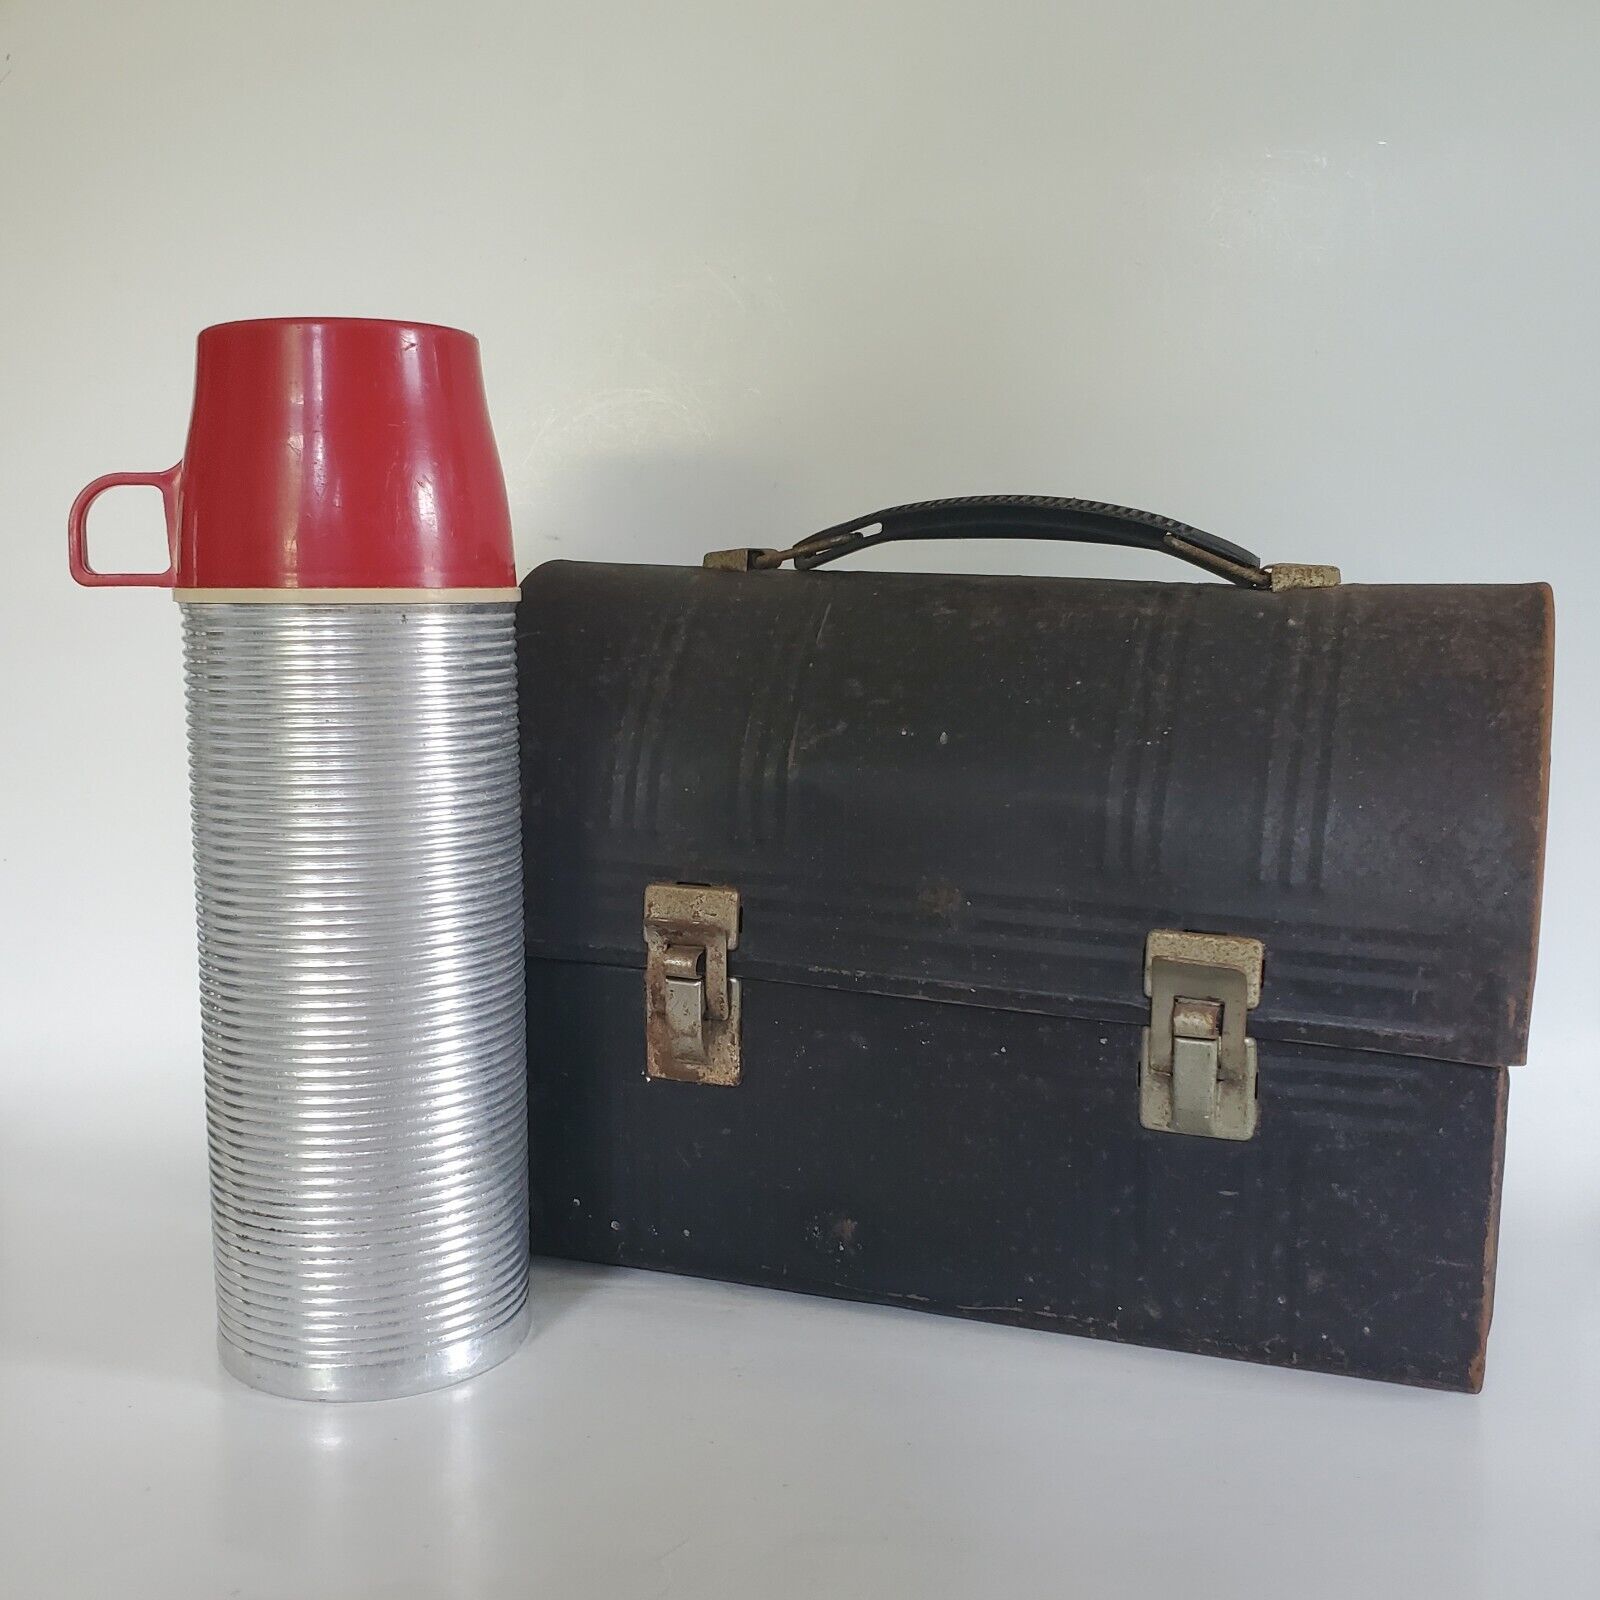 1950s Aladdin Metal Dome Lunch Box & Vintage Seeley Aluminum Ribbed Thermos